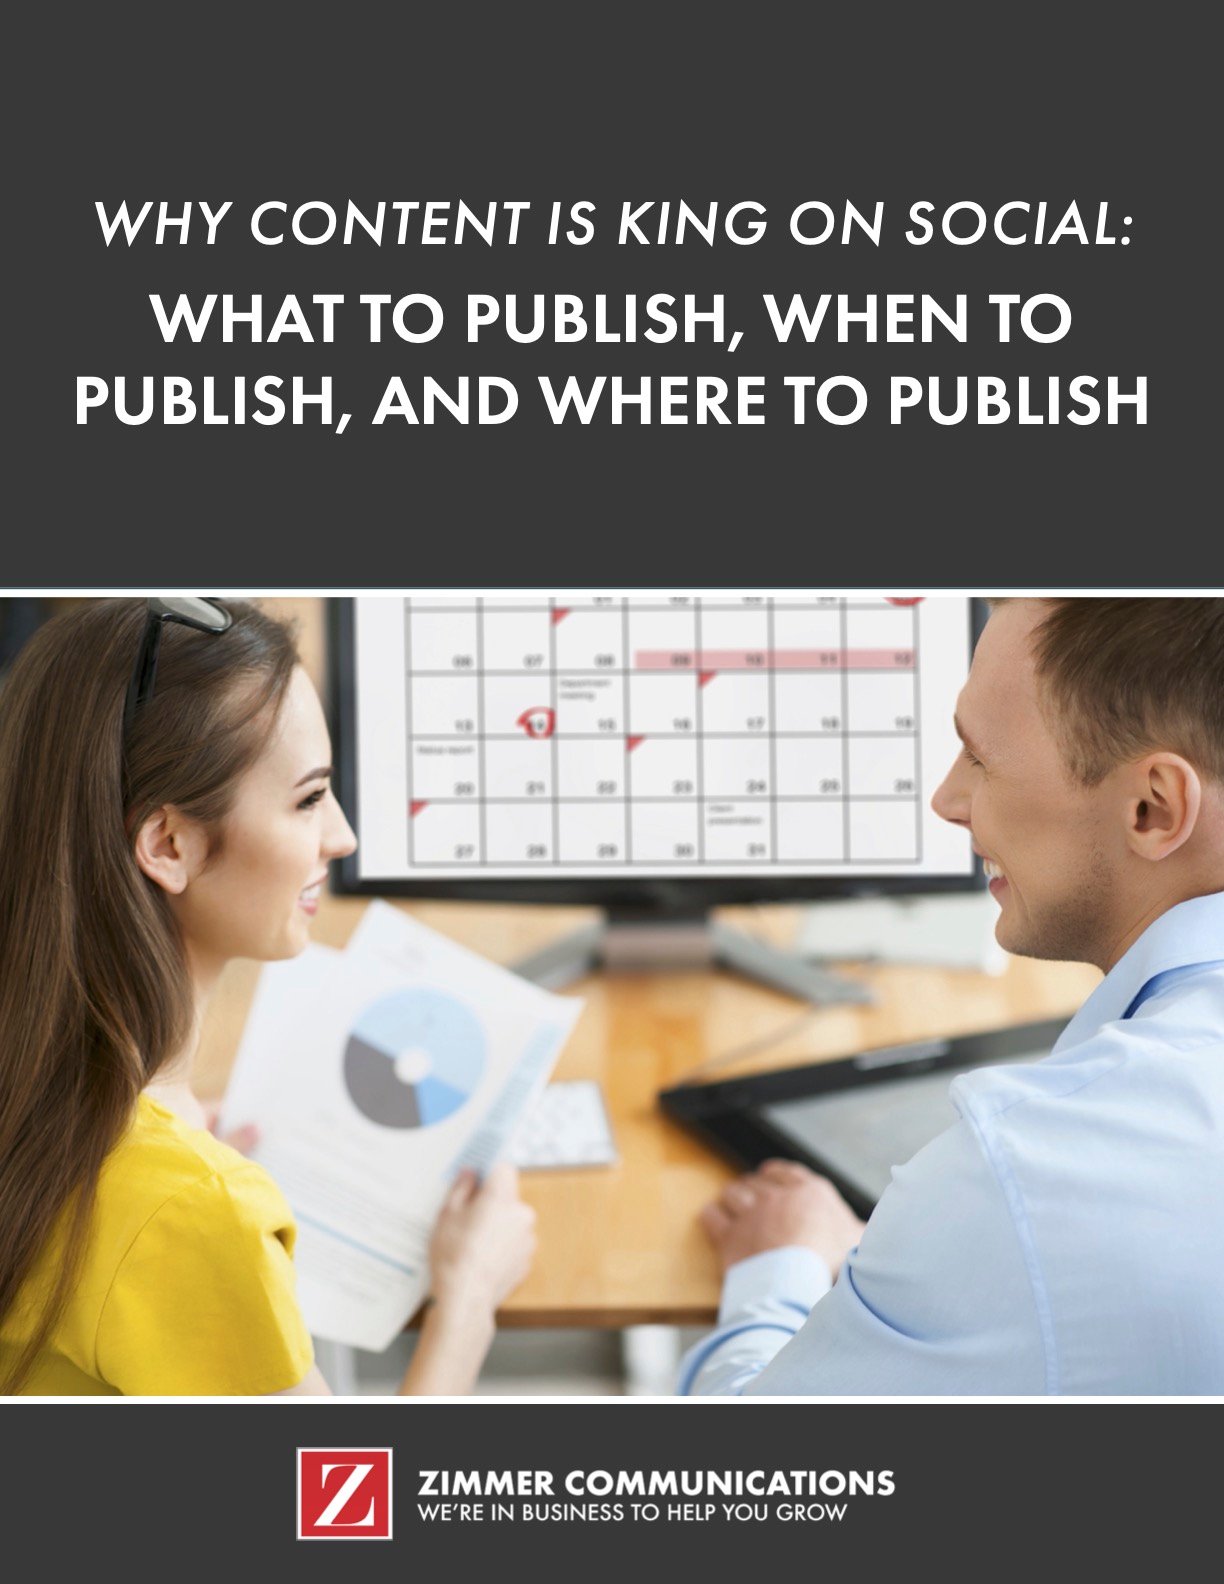 Why Content is King on Social: What to Publish, When to Publish, and Where to Publish